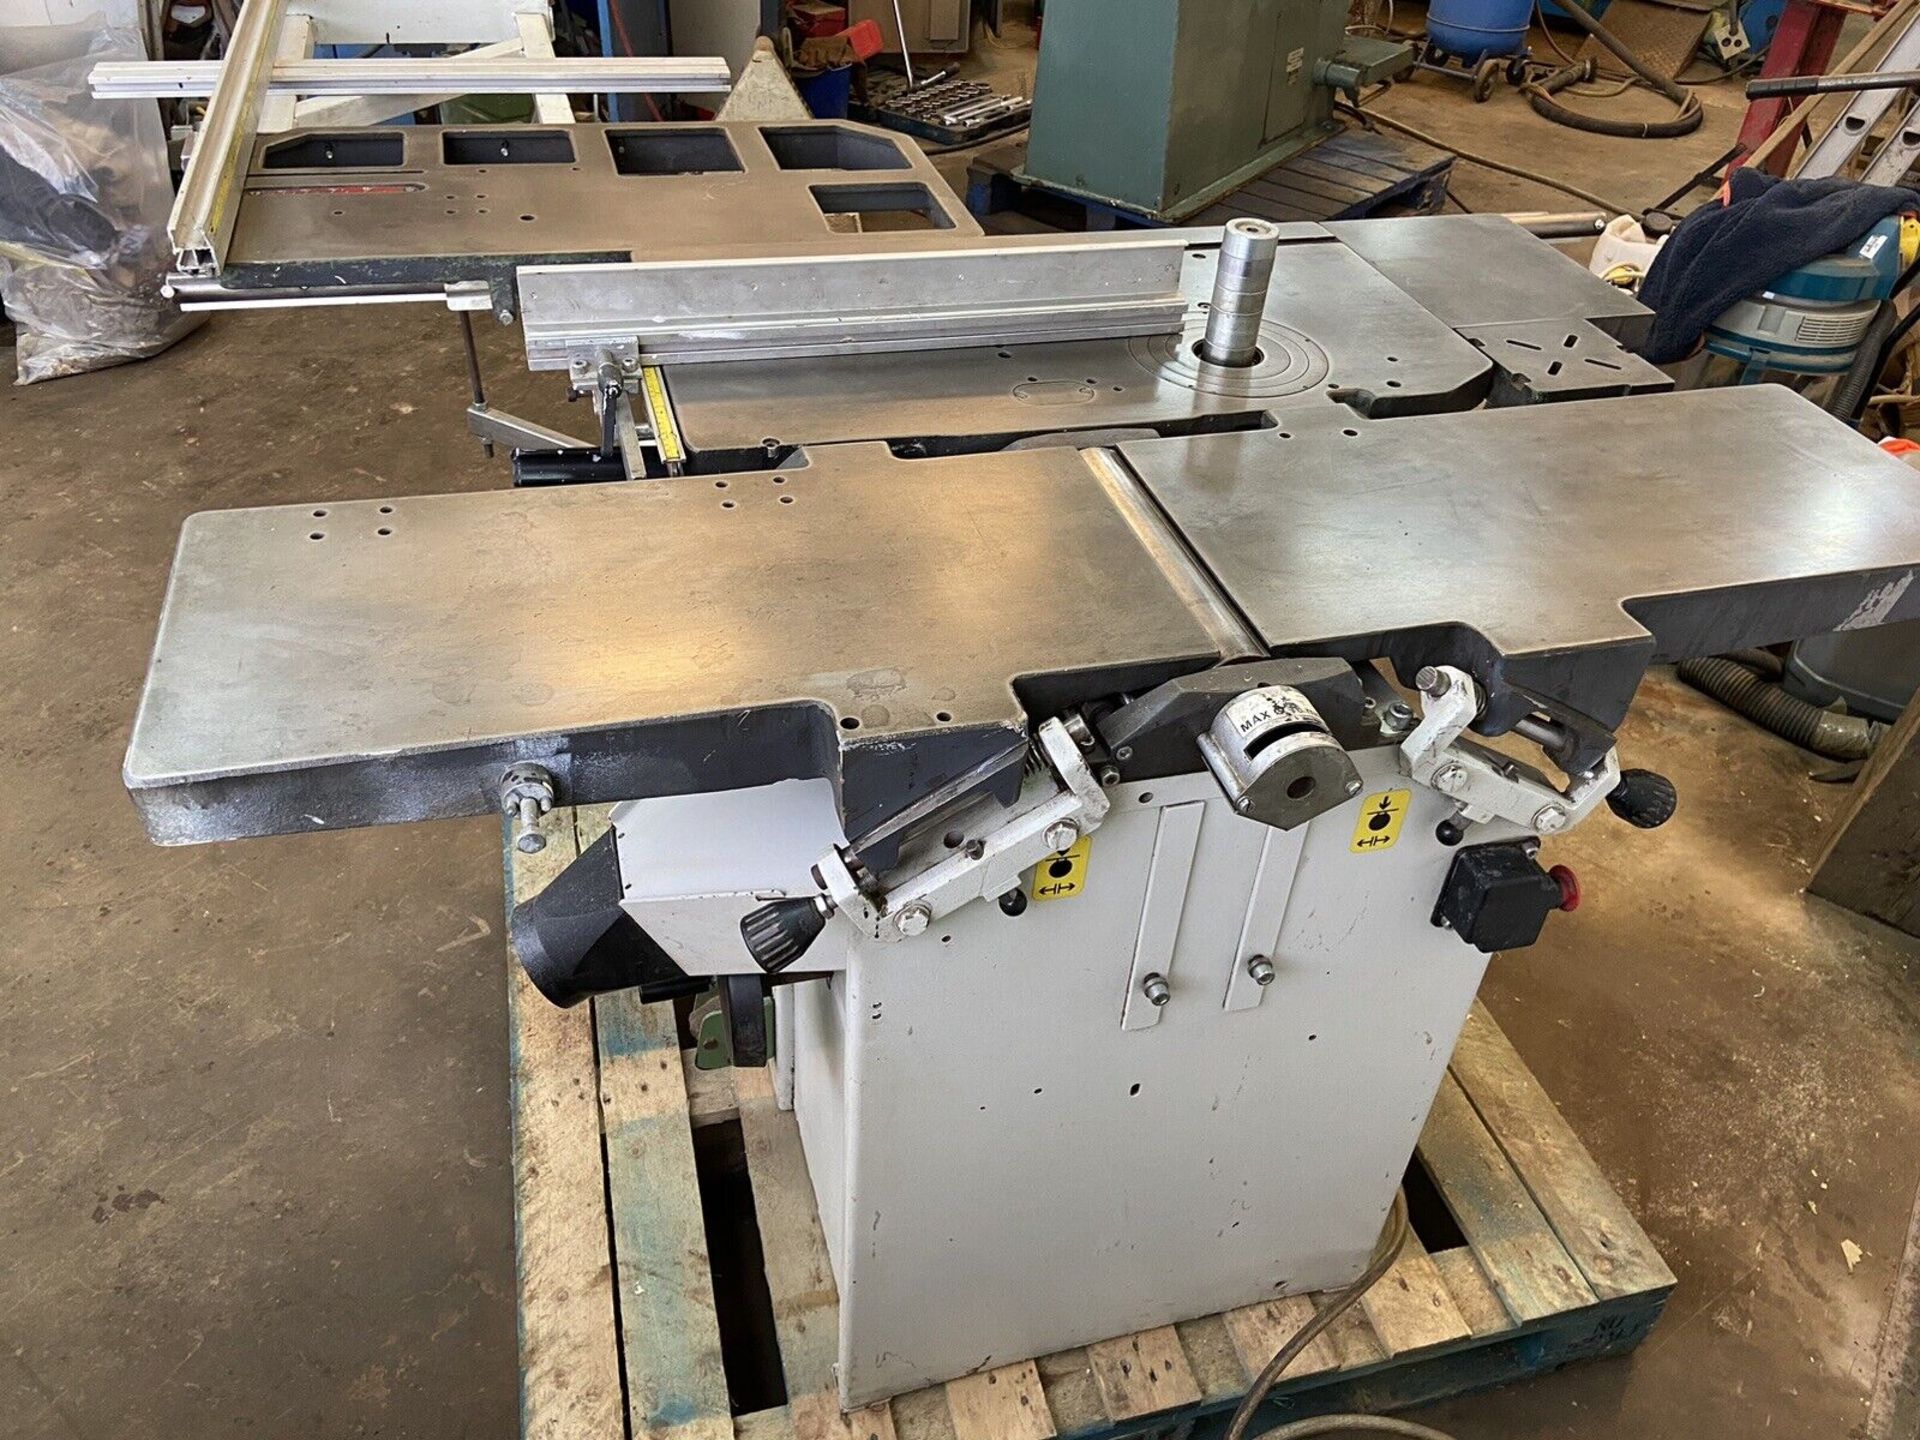 Robland X260-X310 Combination Machine. Planer/Thick, Spindle Moulder,Saw. 220V - Image 8 of 15